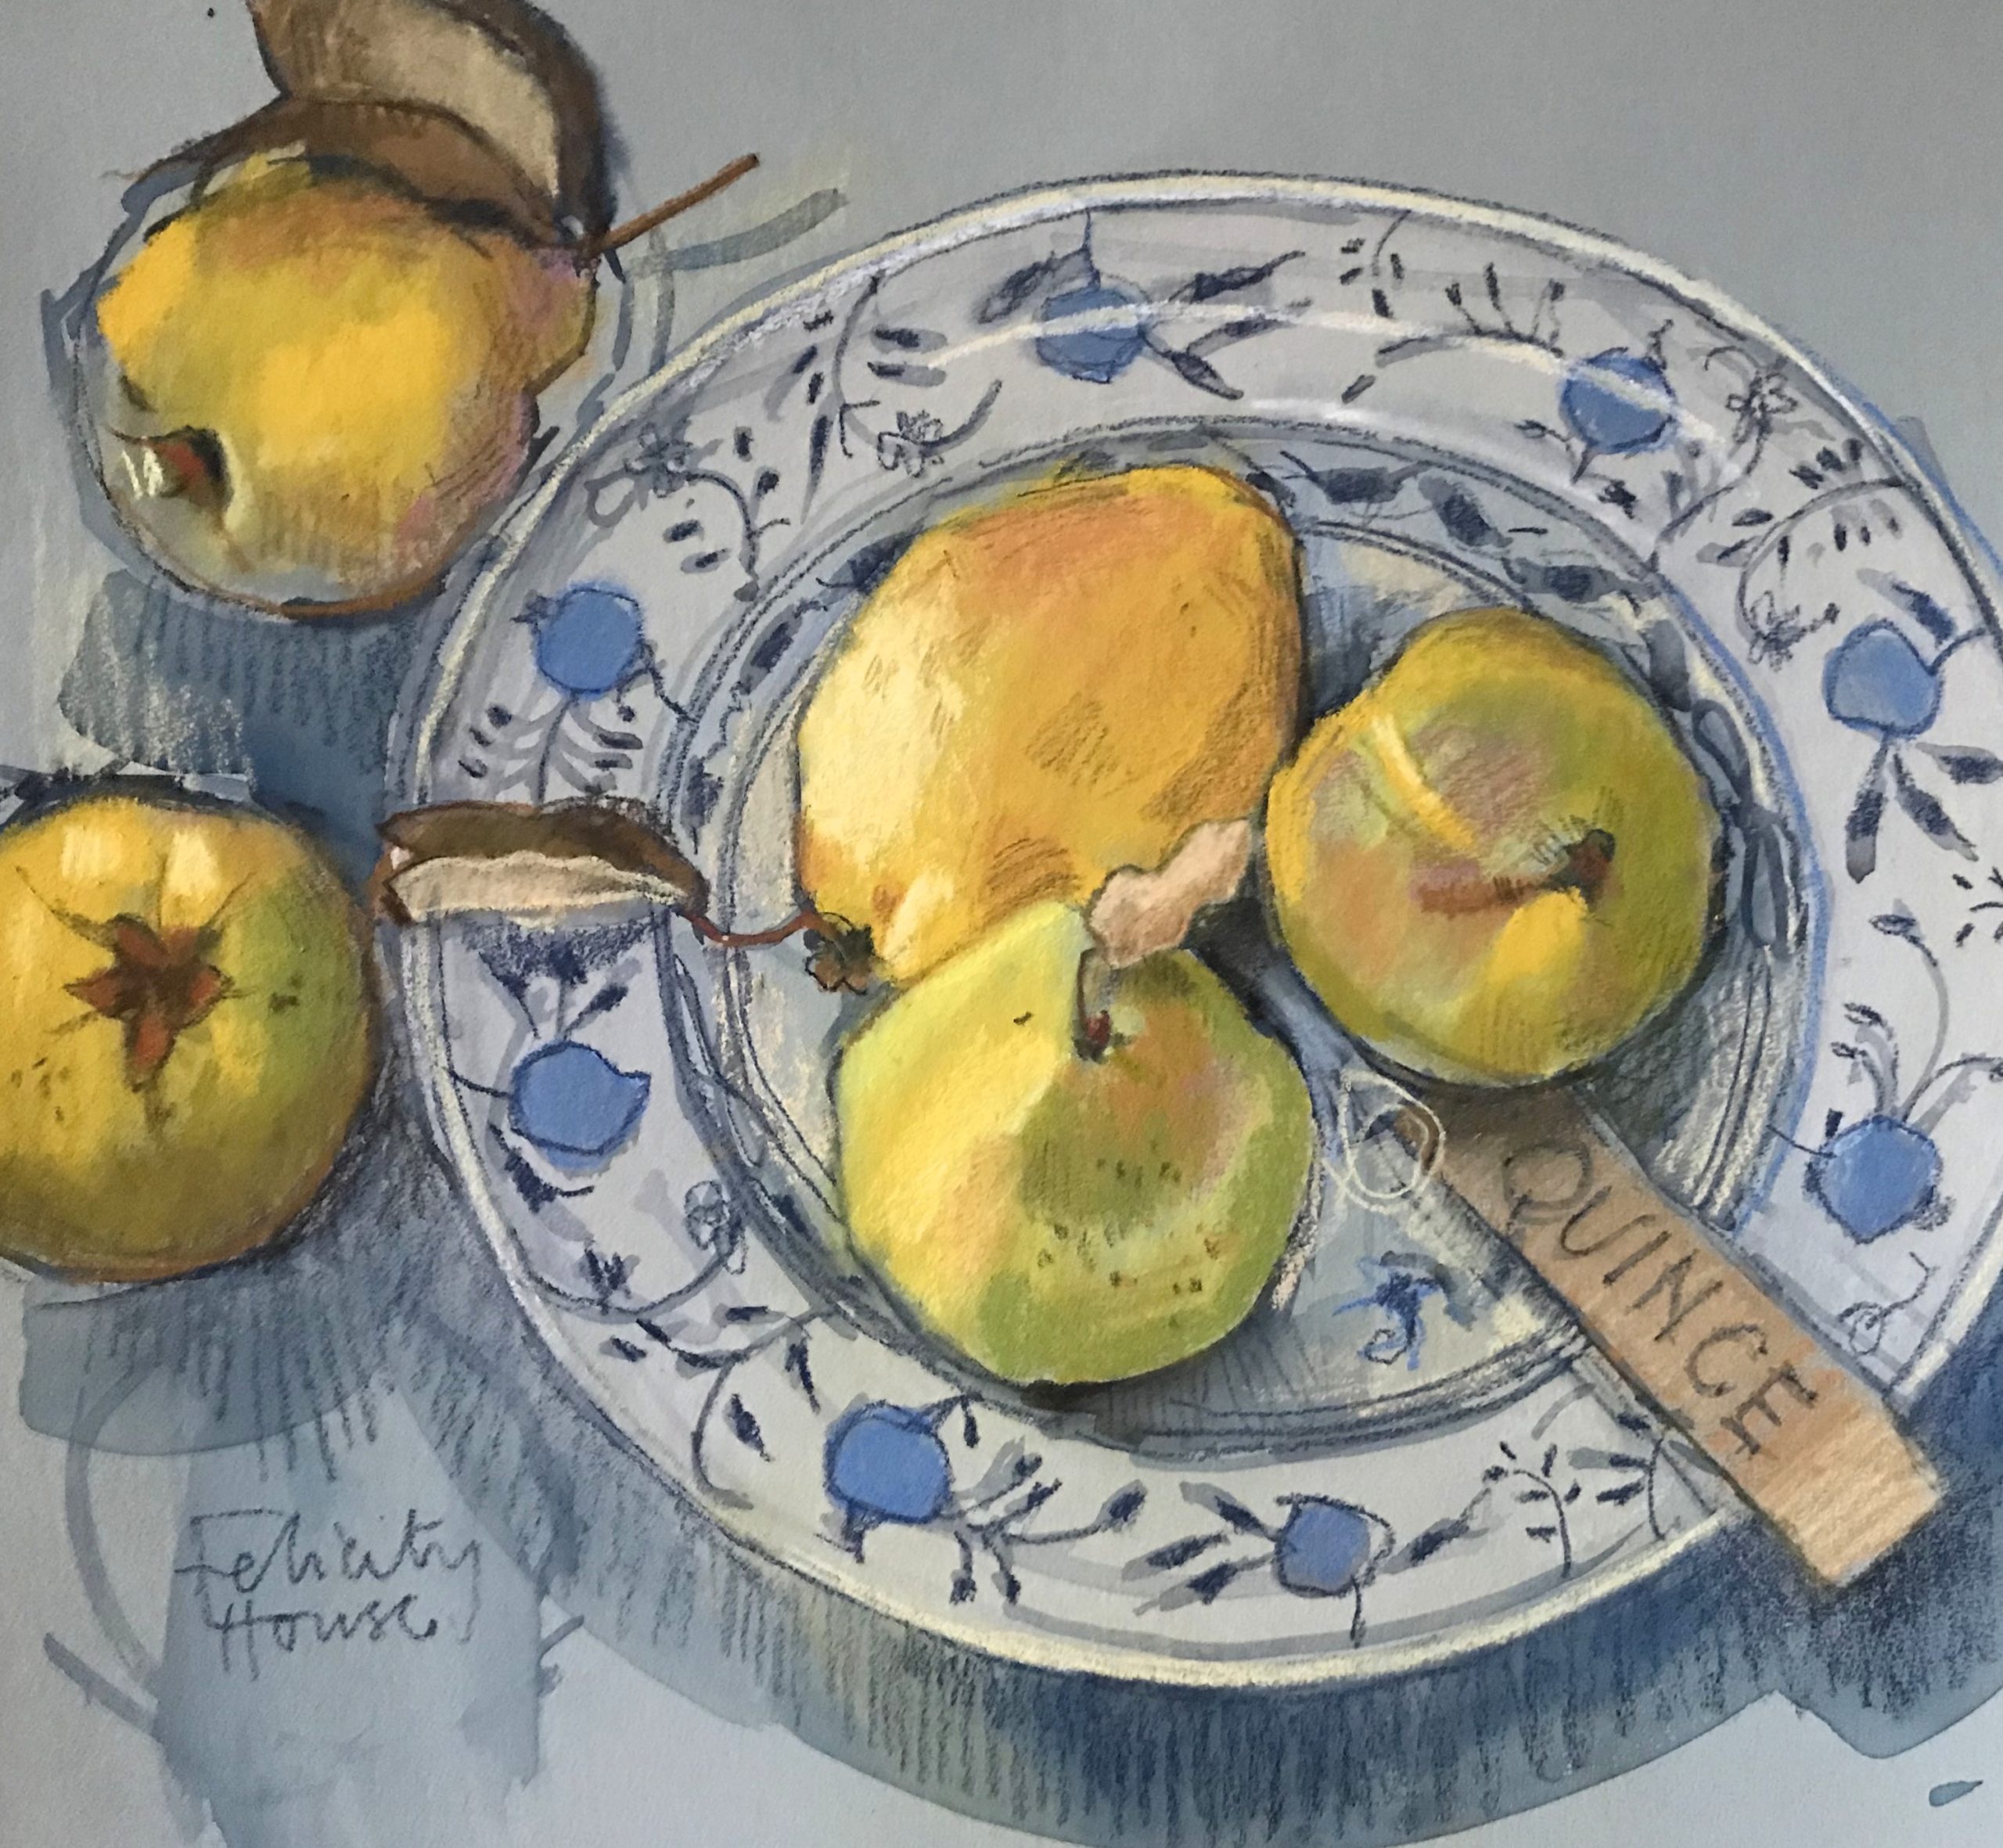 Colour of paper - Felicity House, "Q is for Quince," pastel with watercolour underpainting, 20 x 24 cm (8 x 10 in). Cool paper with warm subject matter.